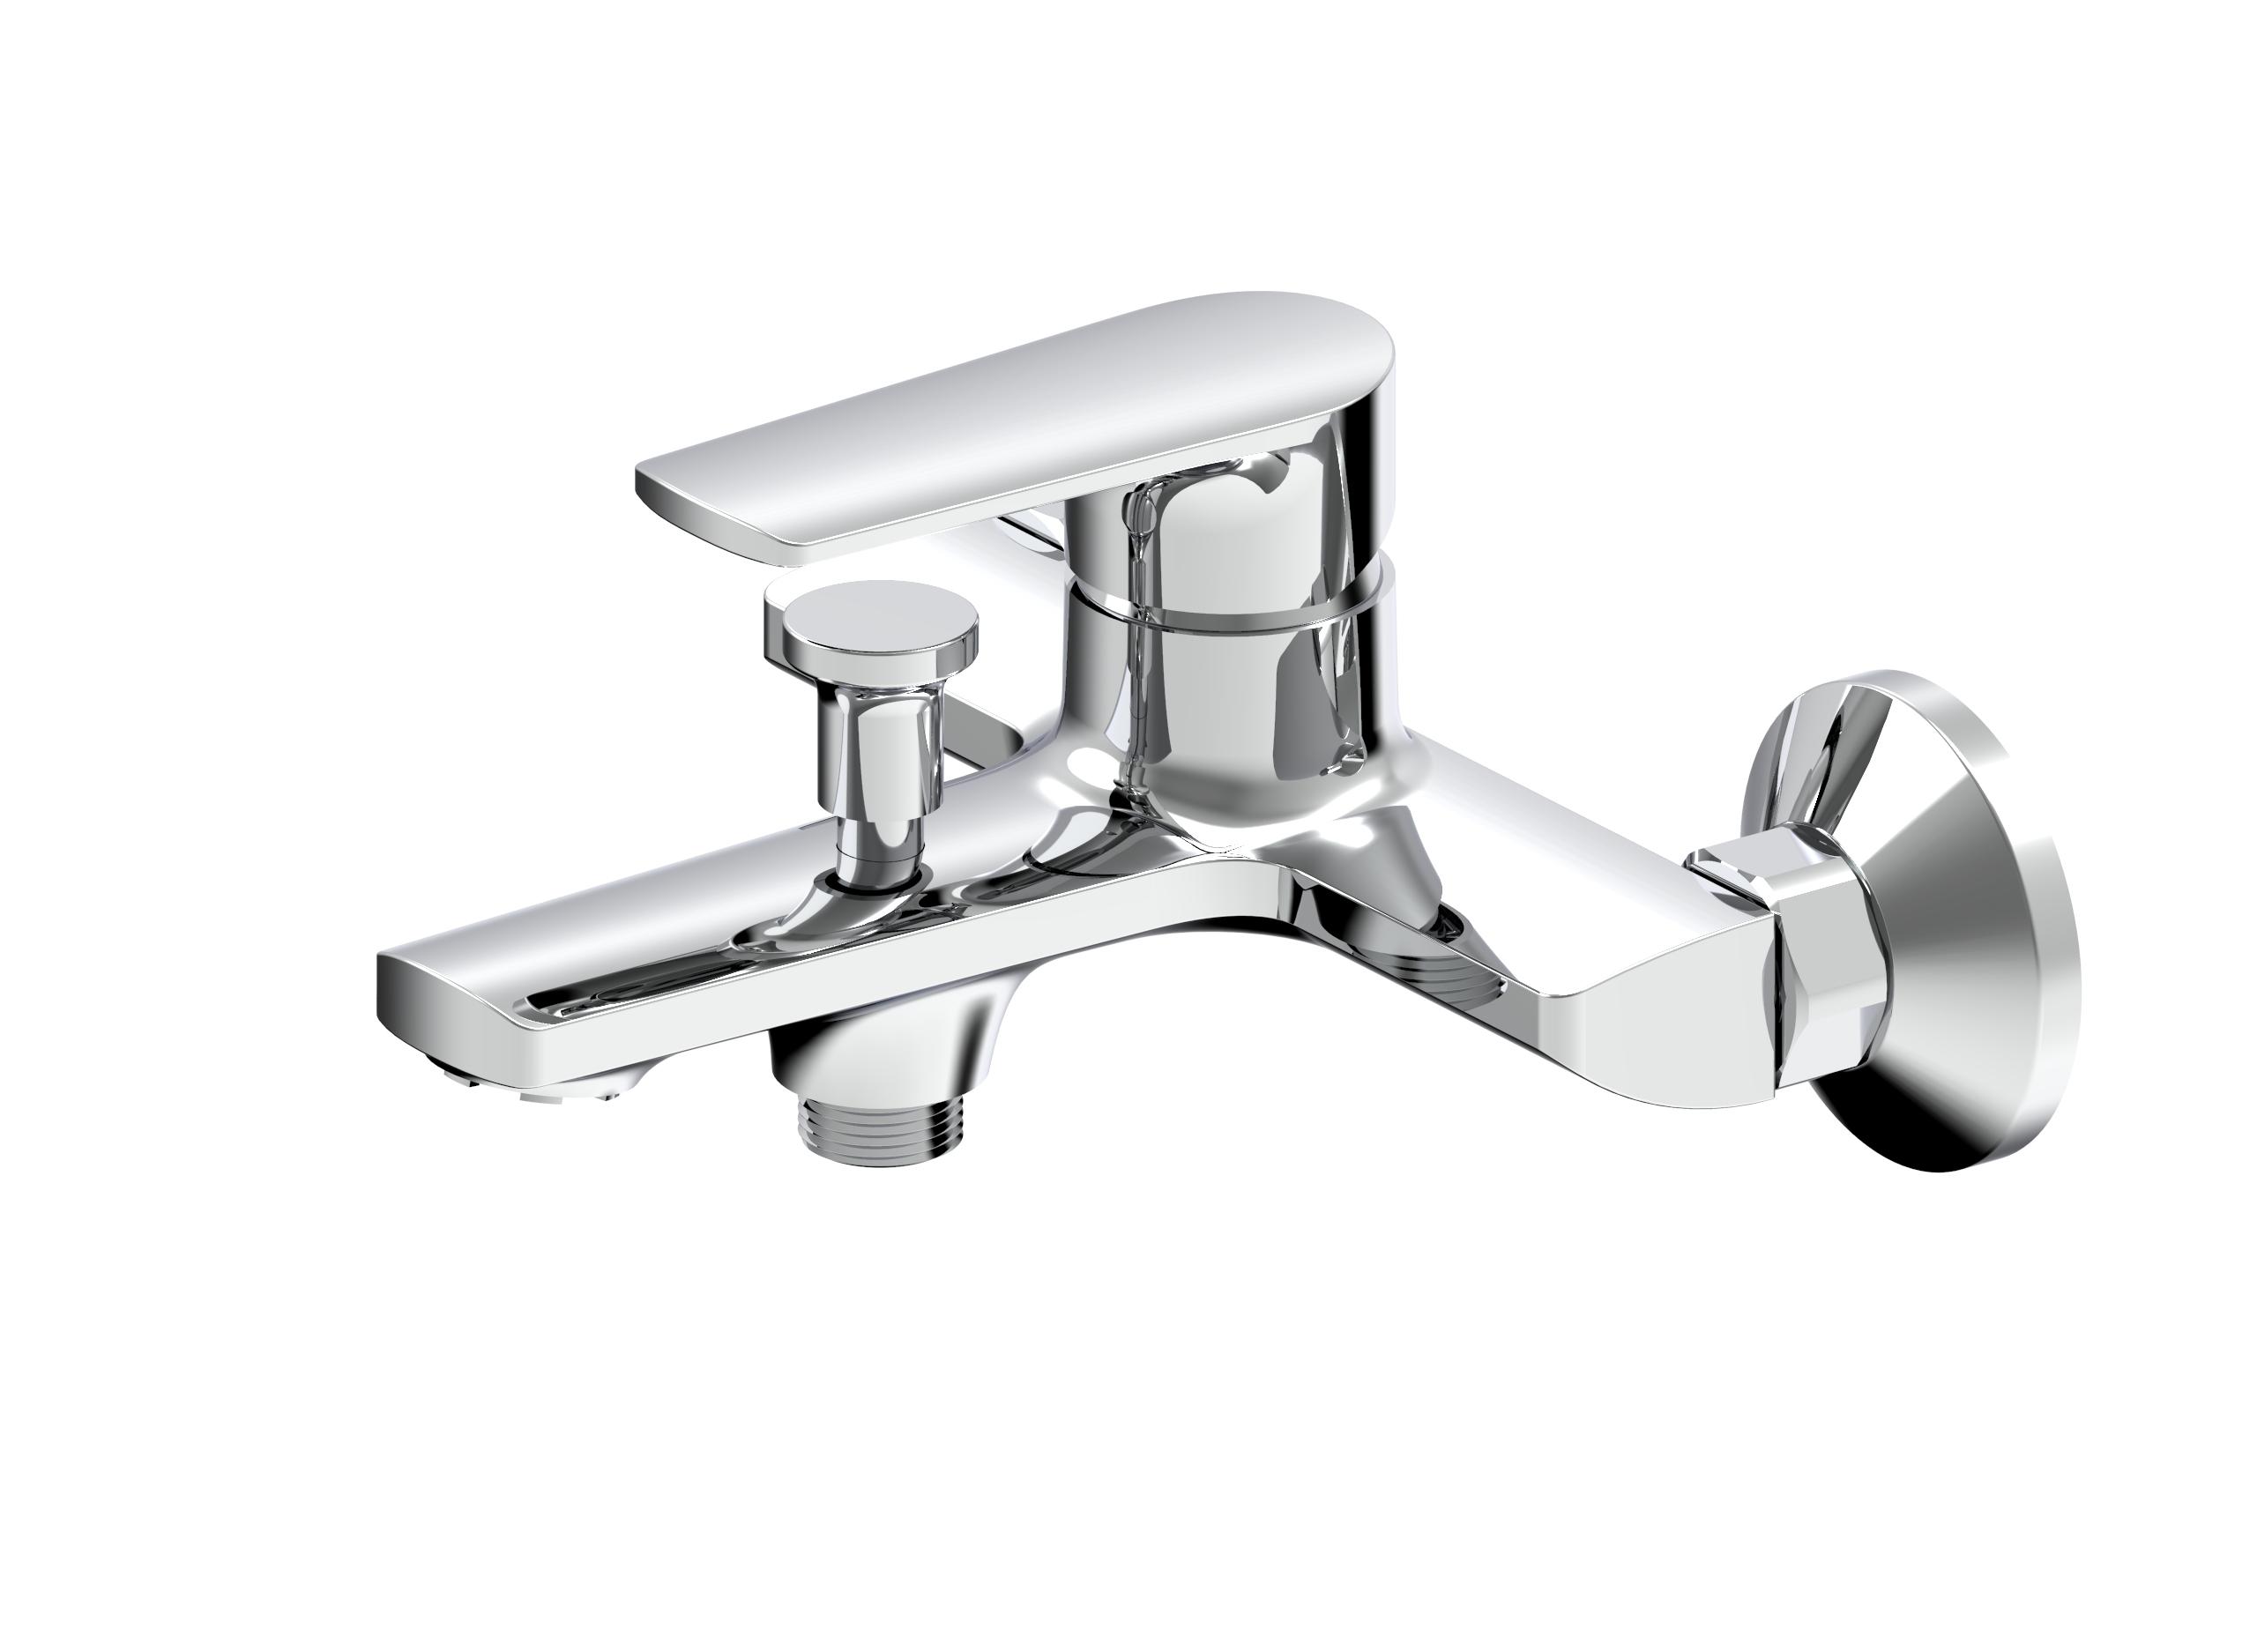 Do brass basin faucets come with different types of handles, such as single lever, dual handle, or touchless options?